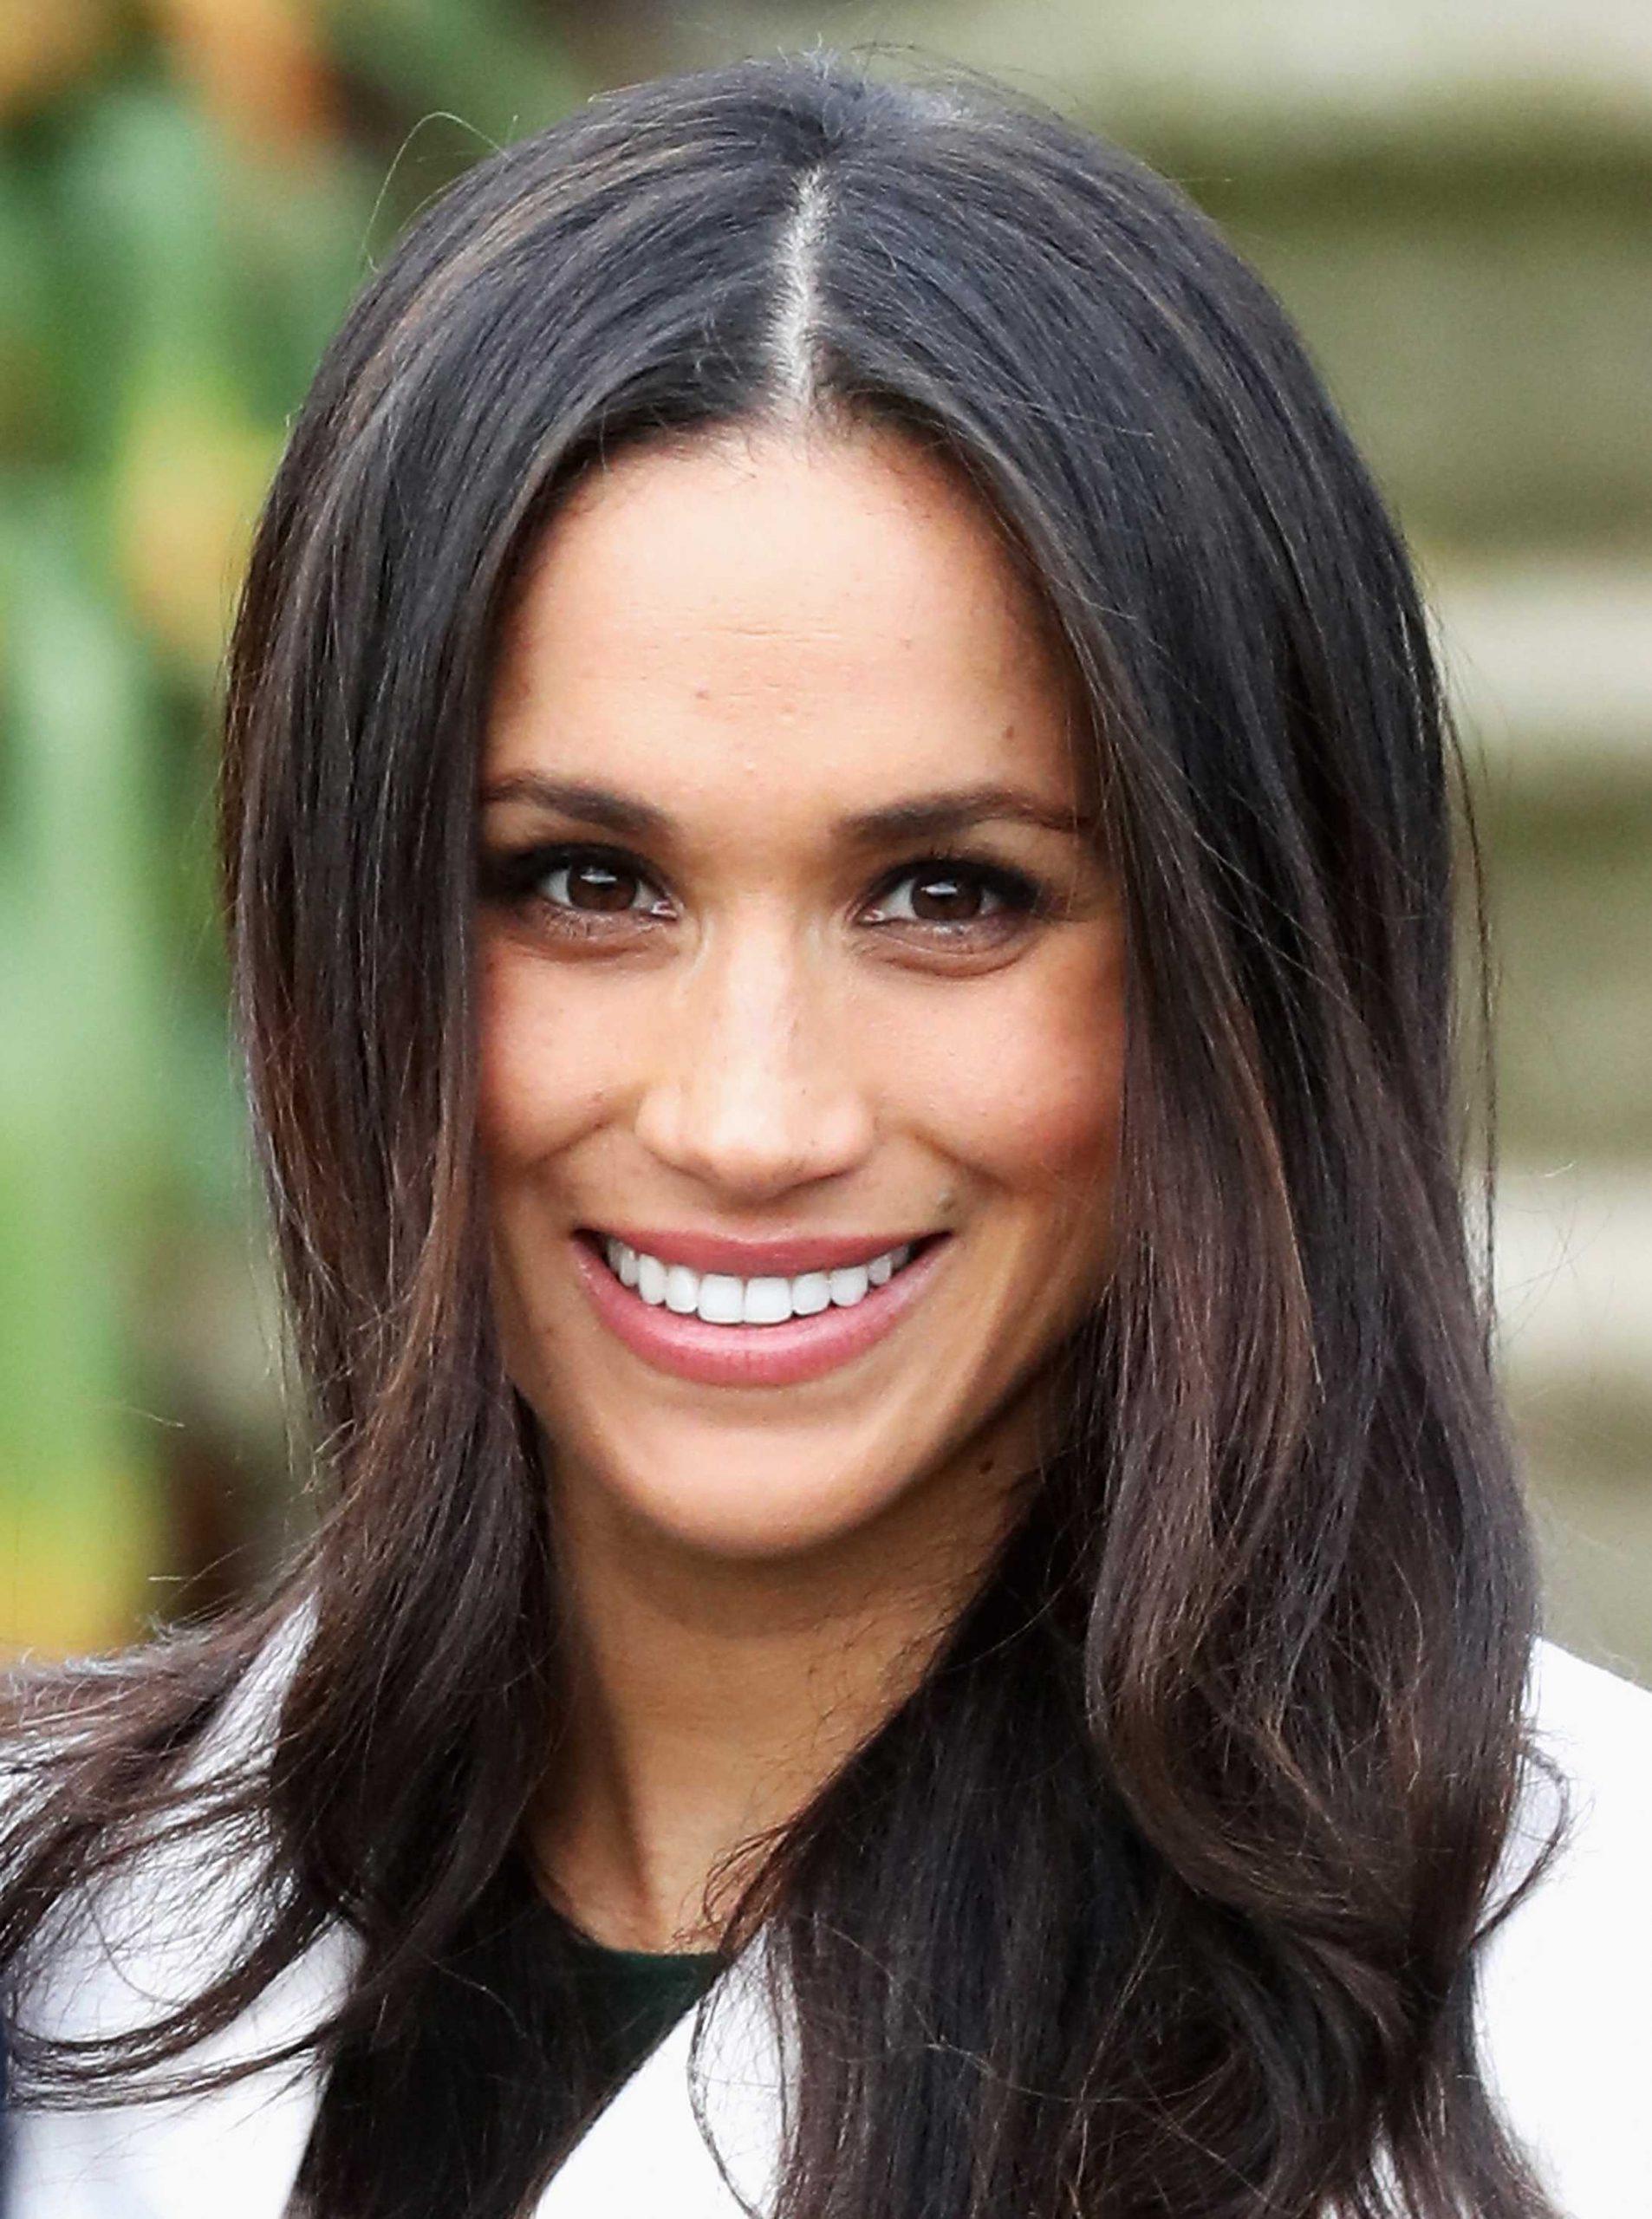 61 Sexy Meghan Markle Boobs Pictures Will Hypnotise You With Her Exquisite Body | Best Of Comic Books